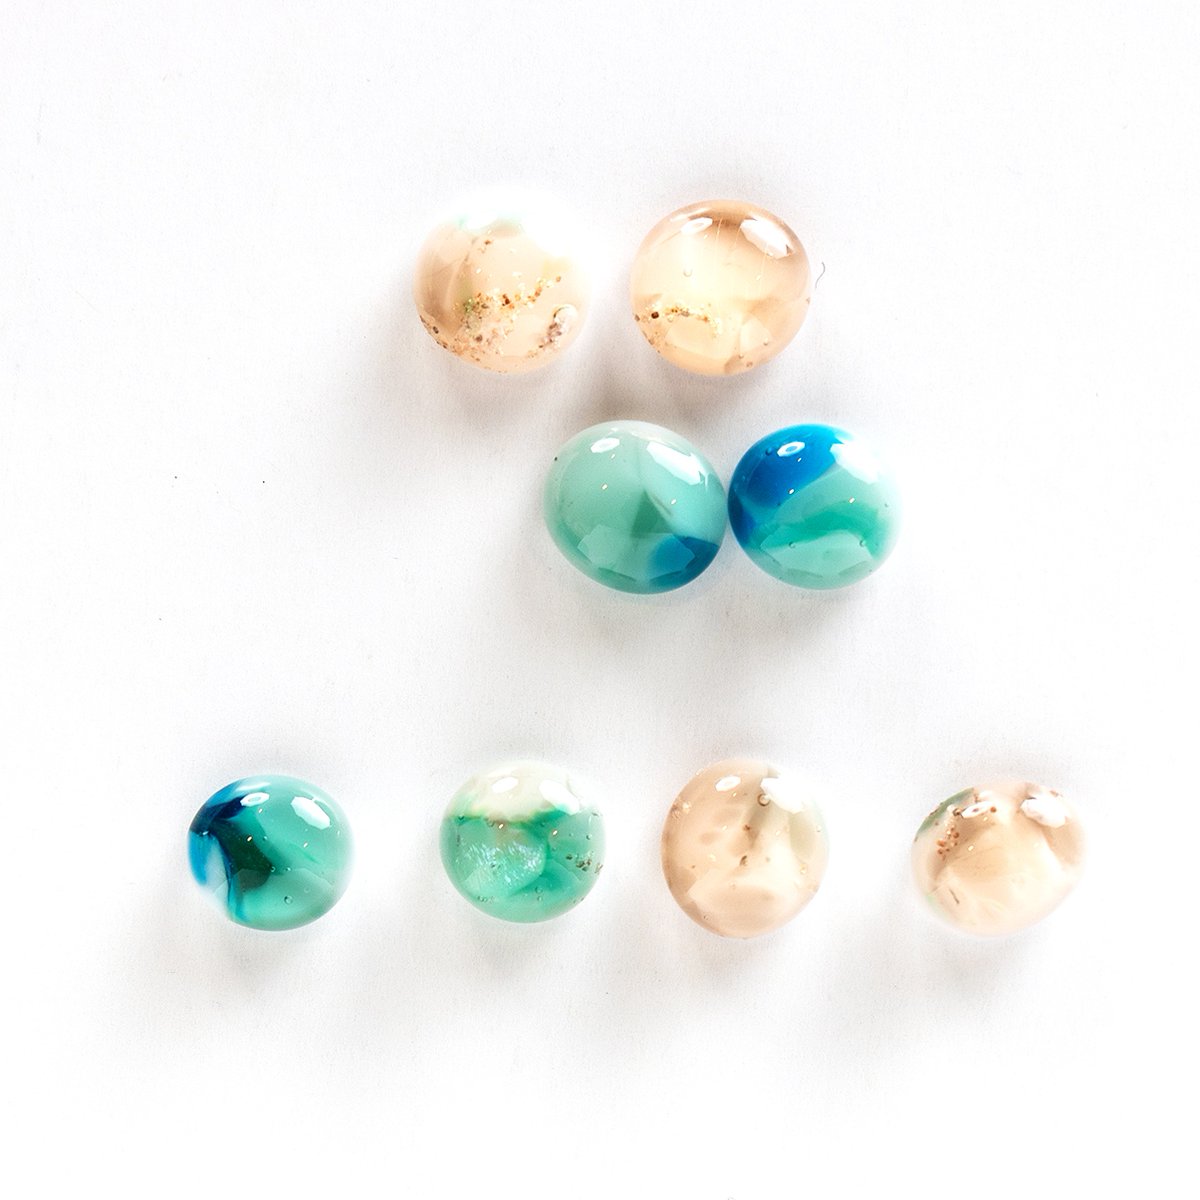 When you wear a piece of my Ocean Essence collection, you'll be reminded of your favourite happy place. Can you see the tiny grains of beach sand included in these glass studs?

#oceanessence #emeraldsea #centralcoastnsw #beachsand #takeapieceofthebeachwithyou #natureinspiresme